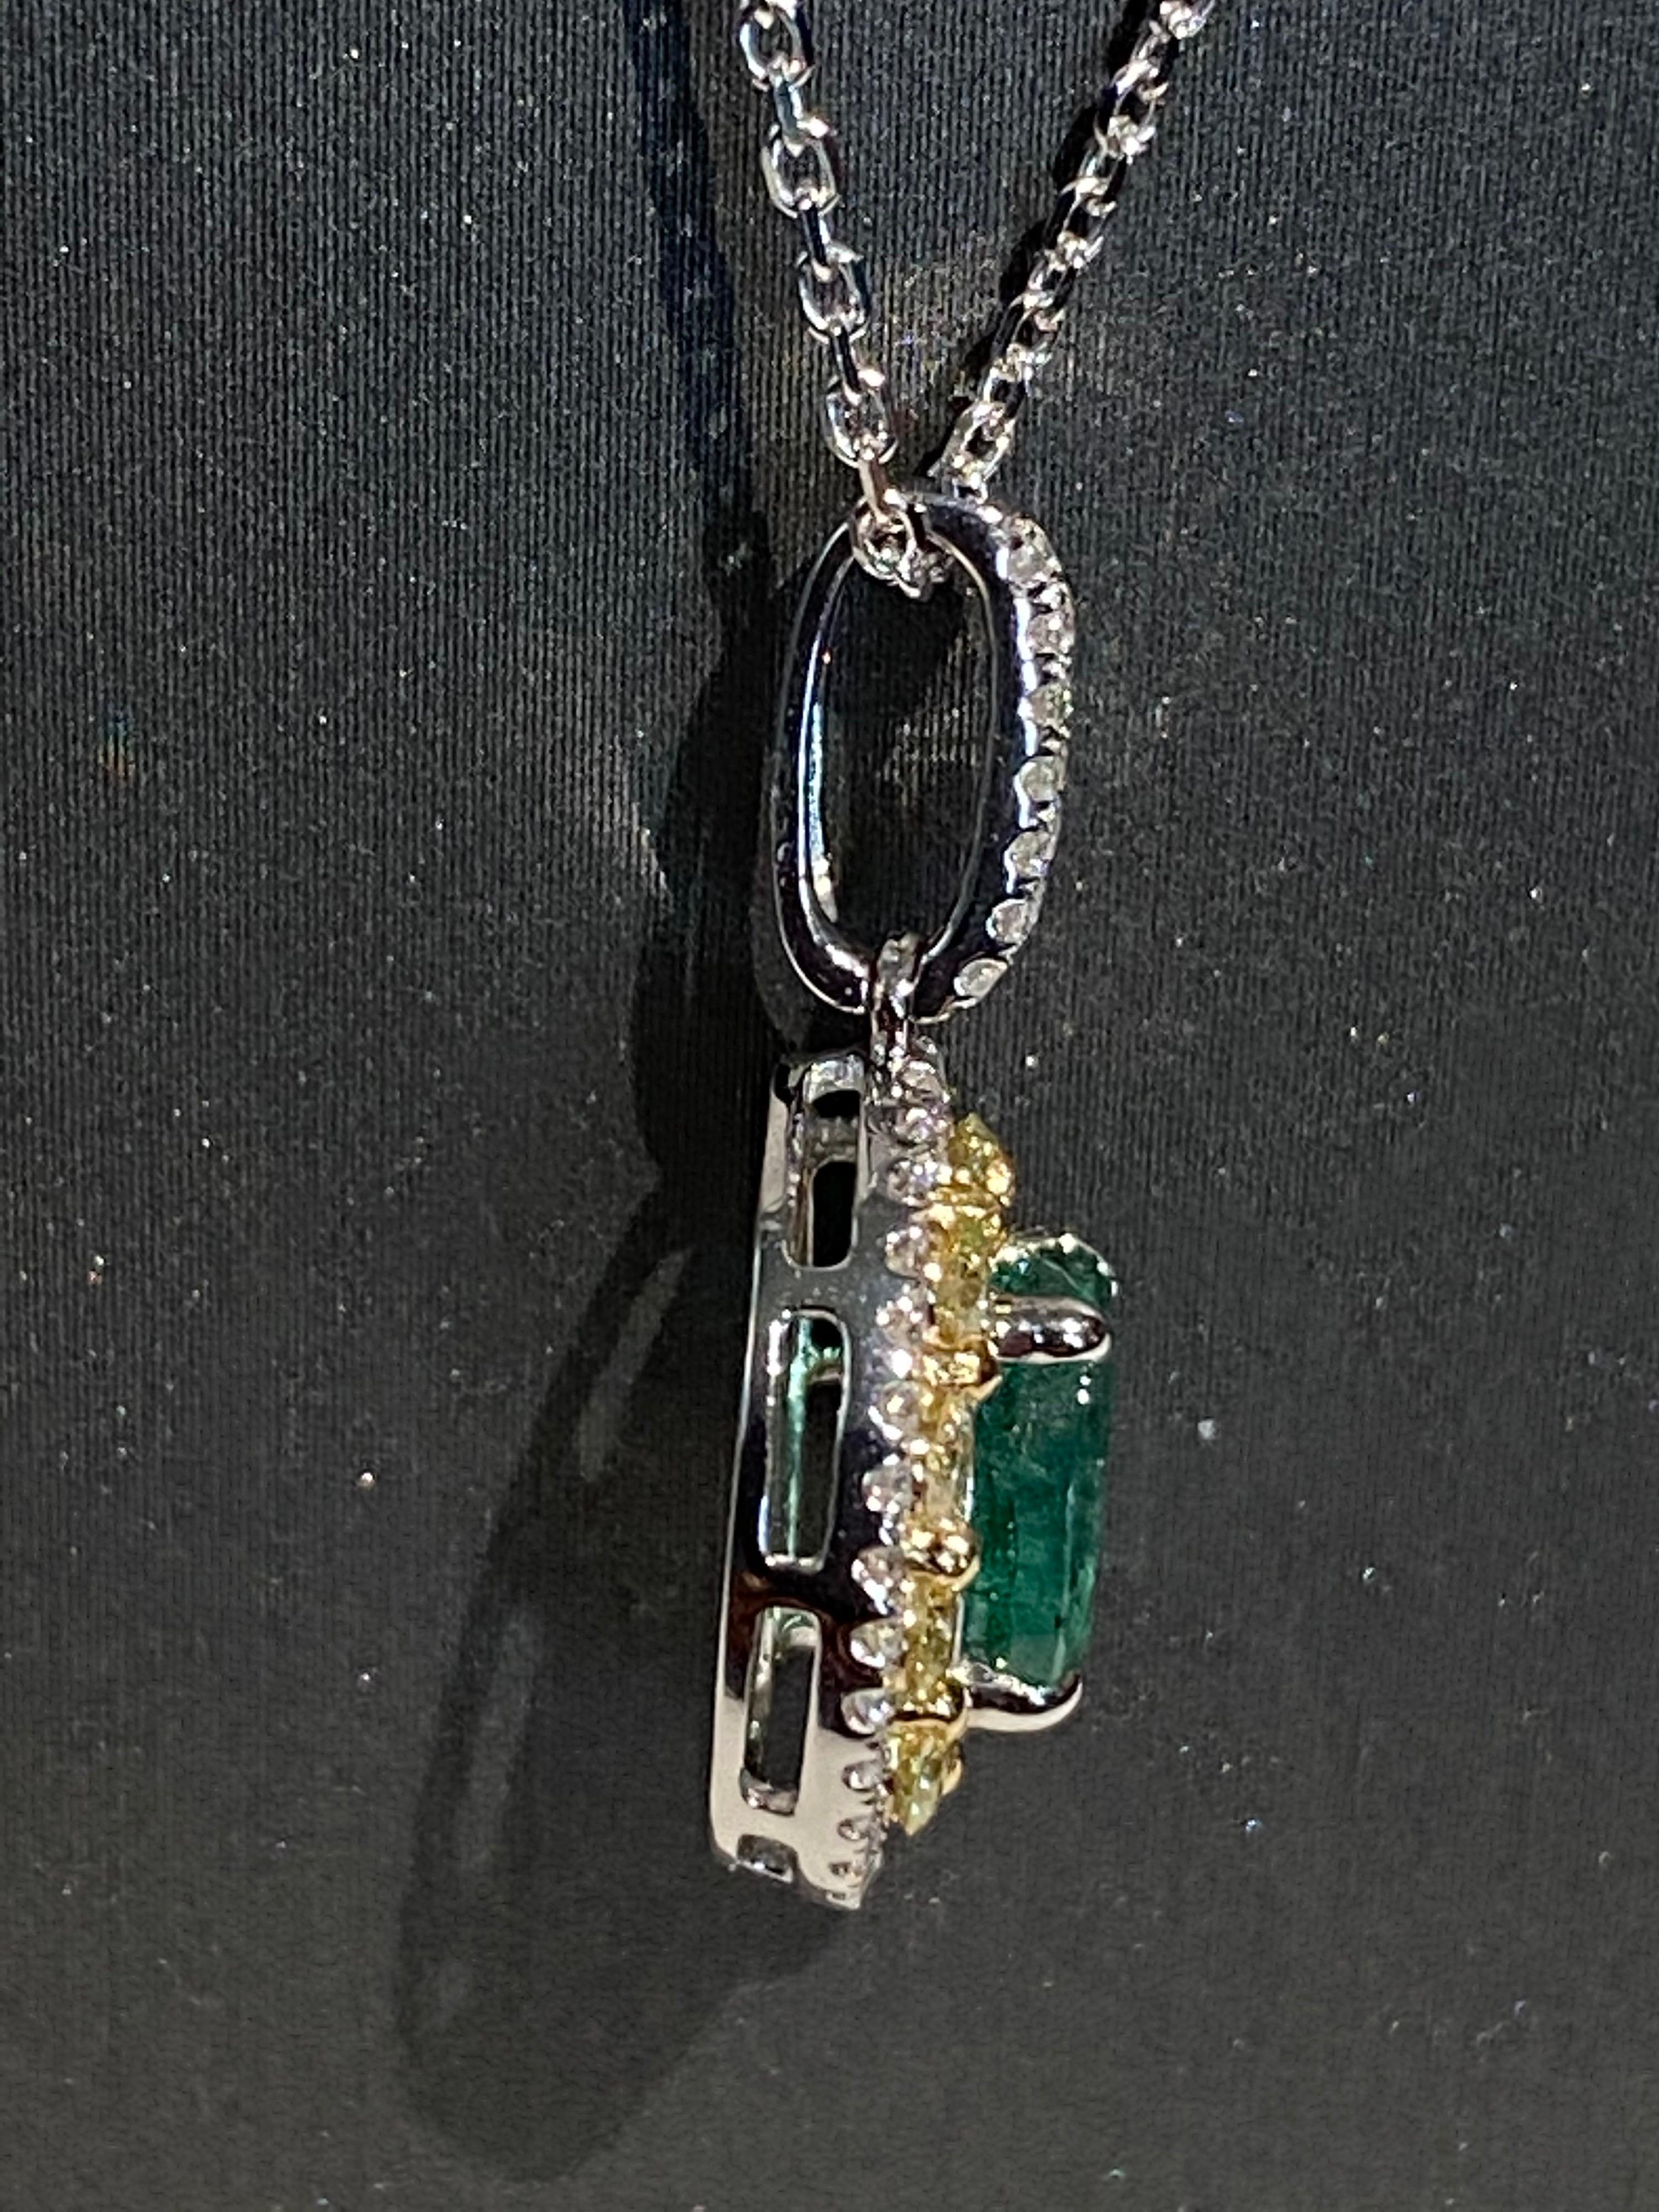 Oval emerald has double halo of yellow and white diamonds. Double halo makes the center stone stand out and look bigger. Set in two tone gold, a white gold chain is included. Crafted with hand.
Emerald: 1.25ct
White Diamond: 0.24ct
Yellow Diamond: